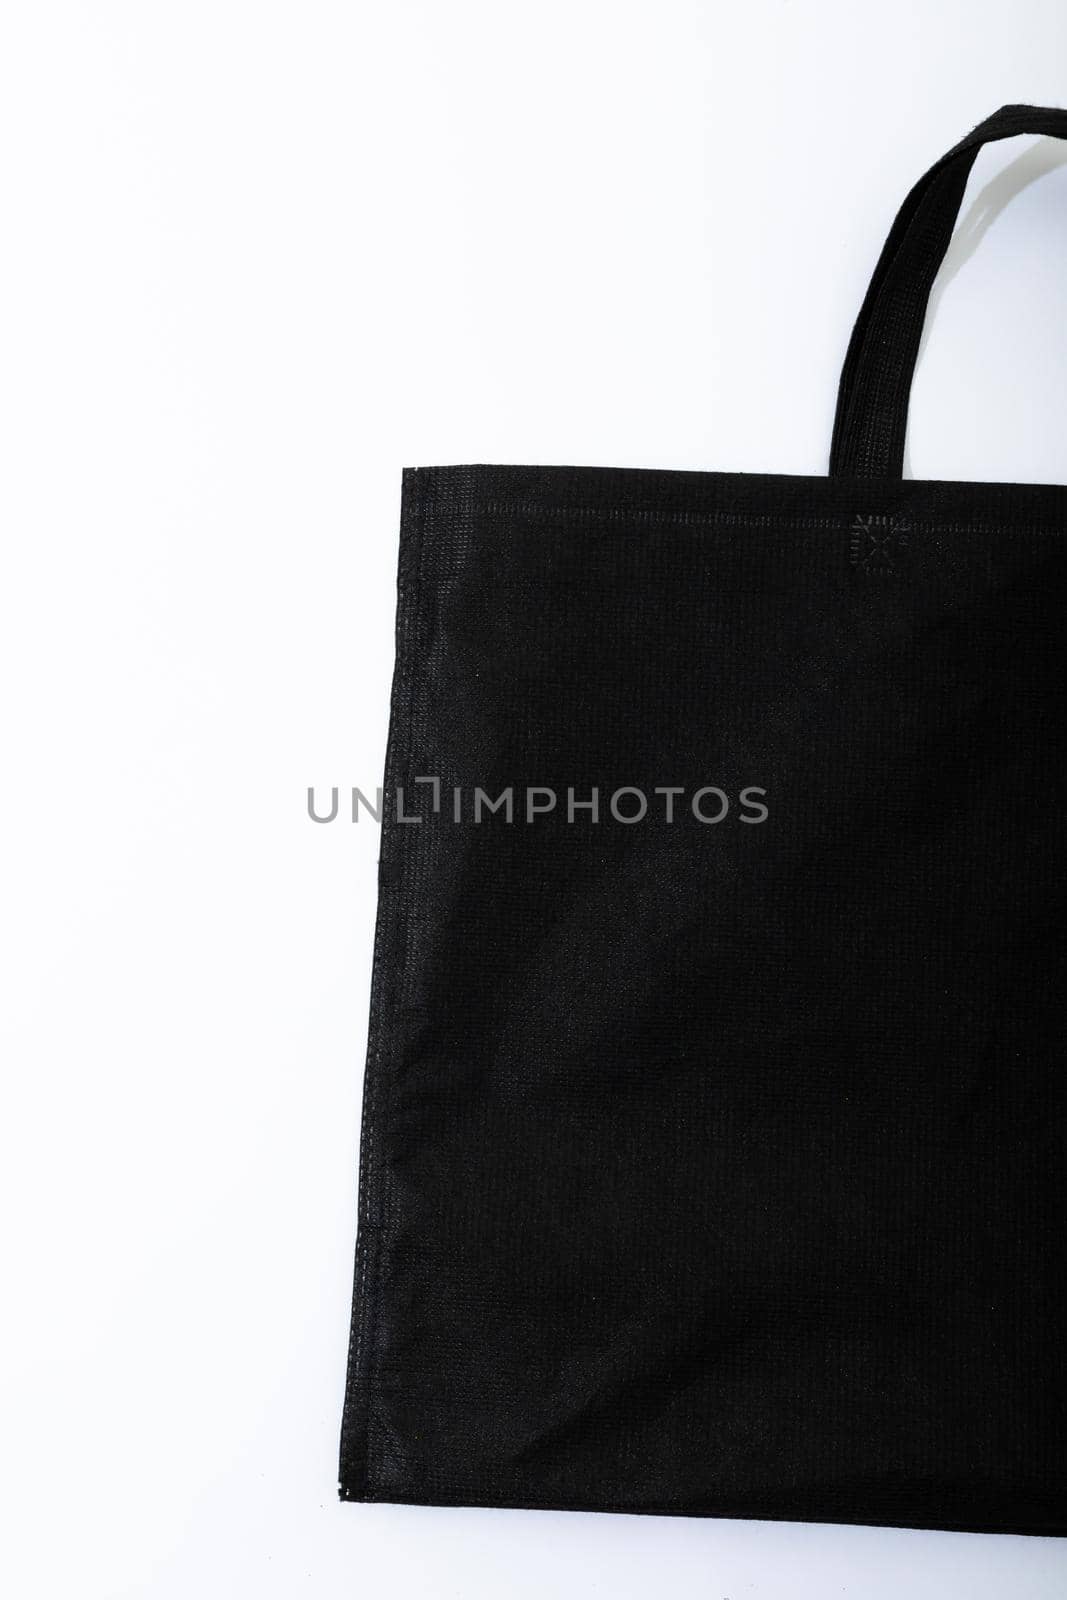 Composition of empty blag canvas shopping bag lying flat on white background with copy space. shopping and retail concept.